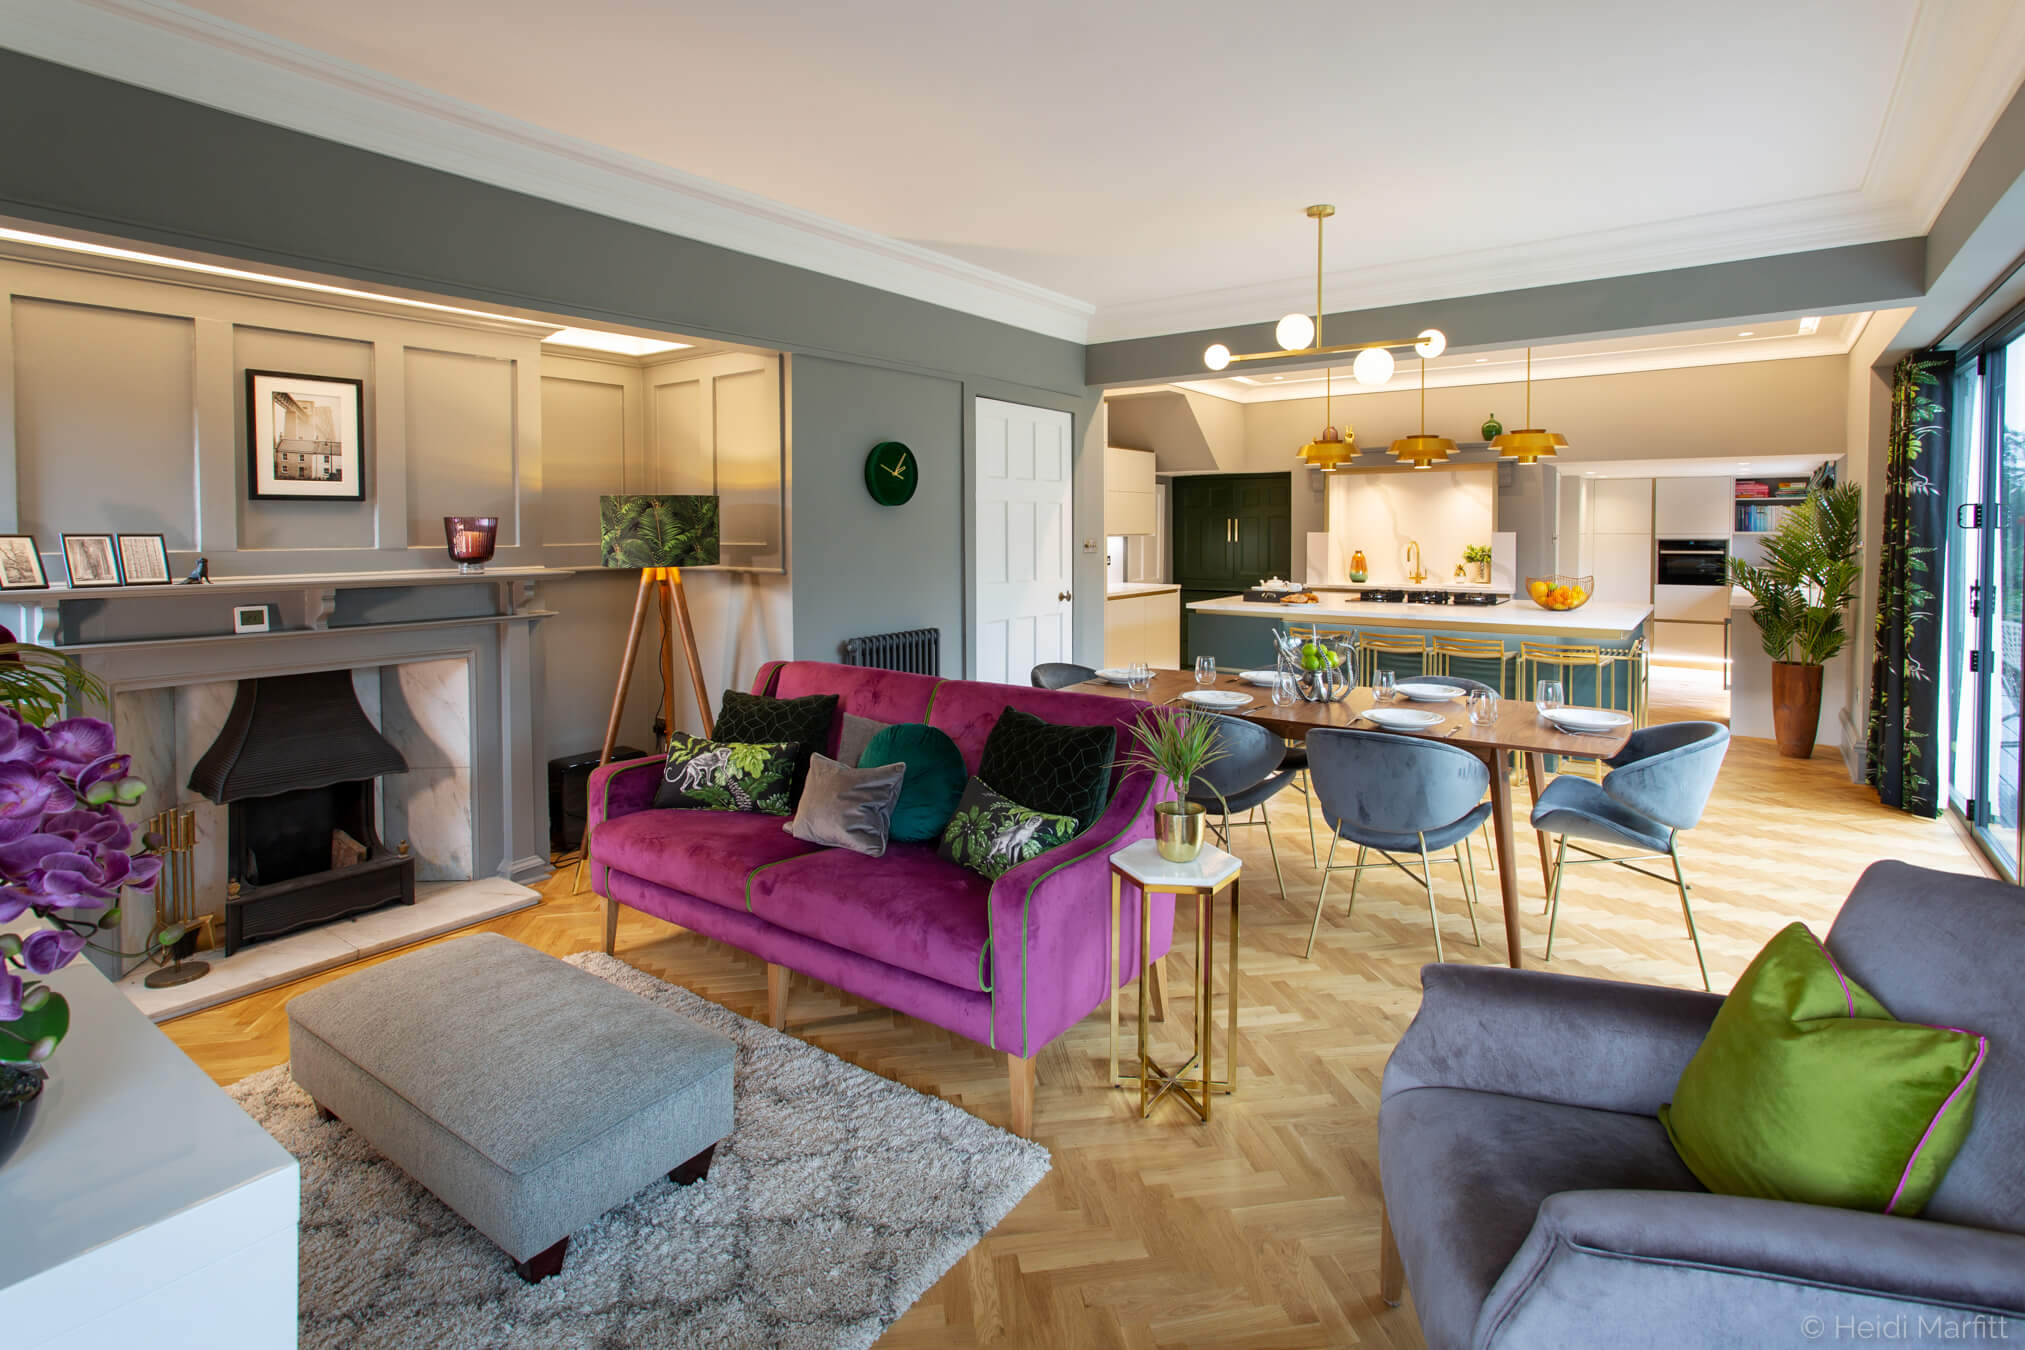 A cosy purple sofa means there is space to chill out in this stylish family kitchen